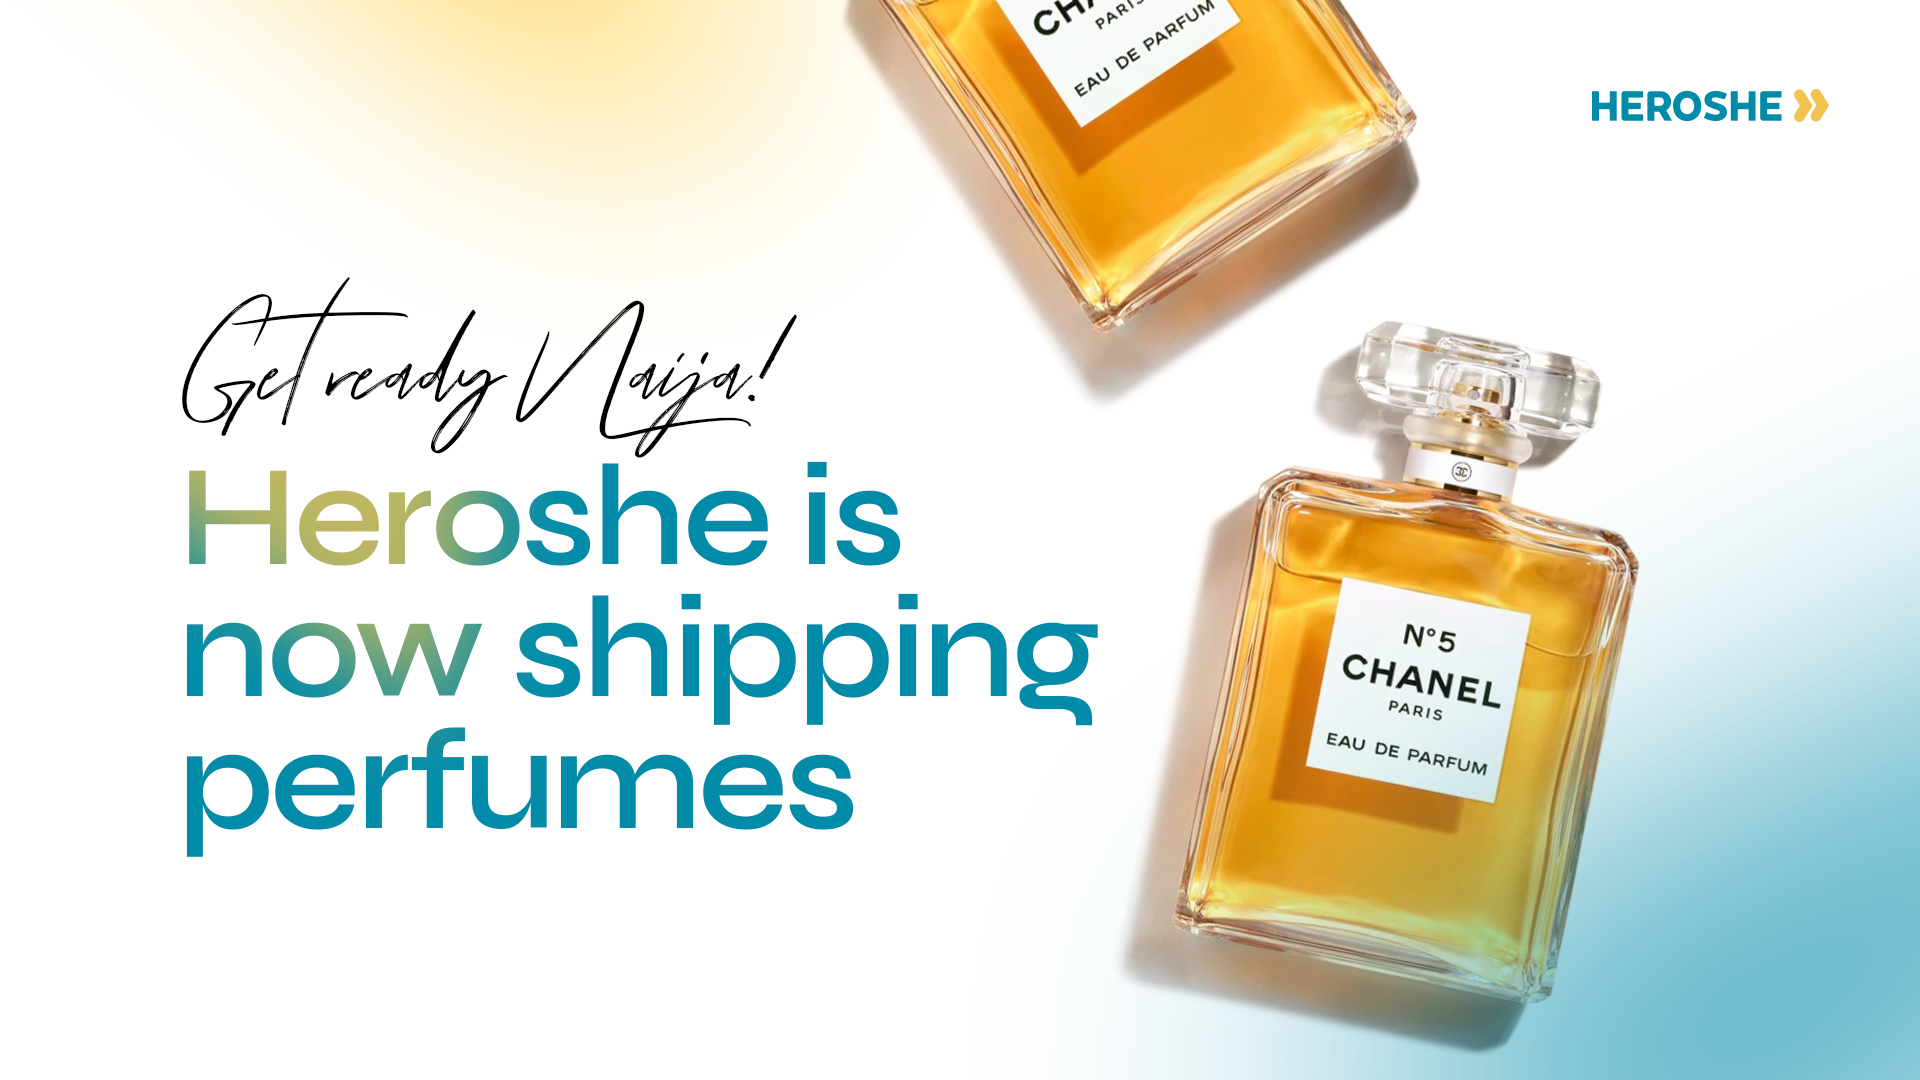 Heroshe is now shipping perfumes